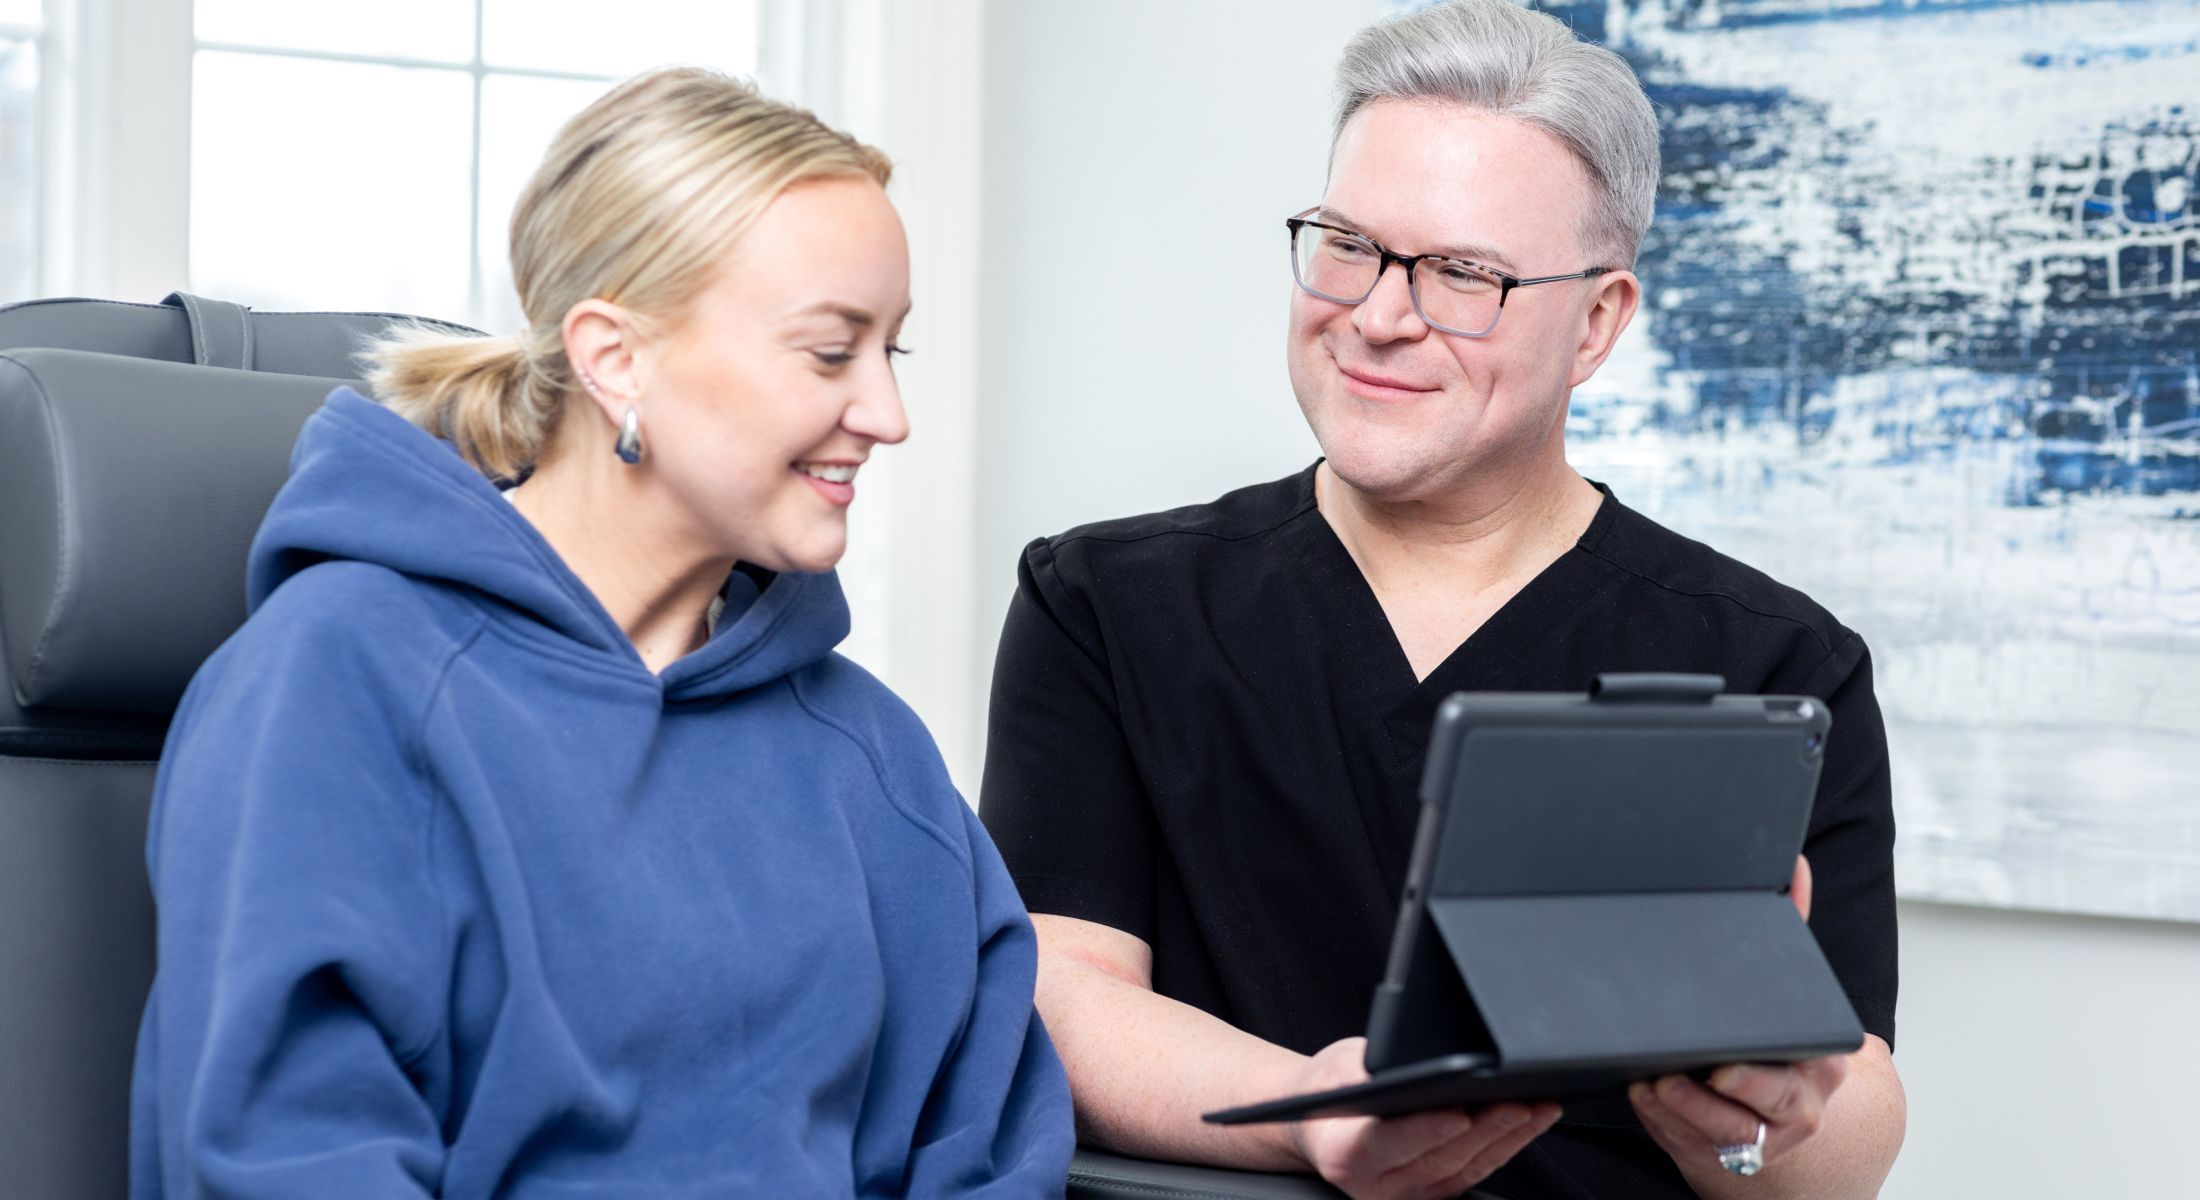 Matt Azulay-LaFever smiling while showing a patient model something on a tablet